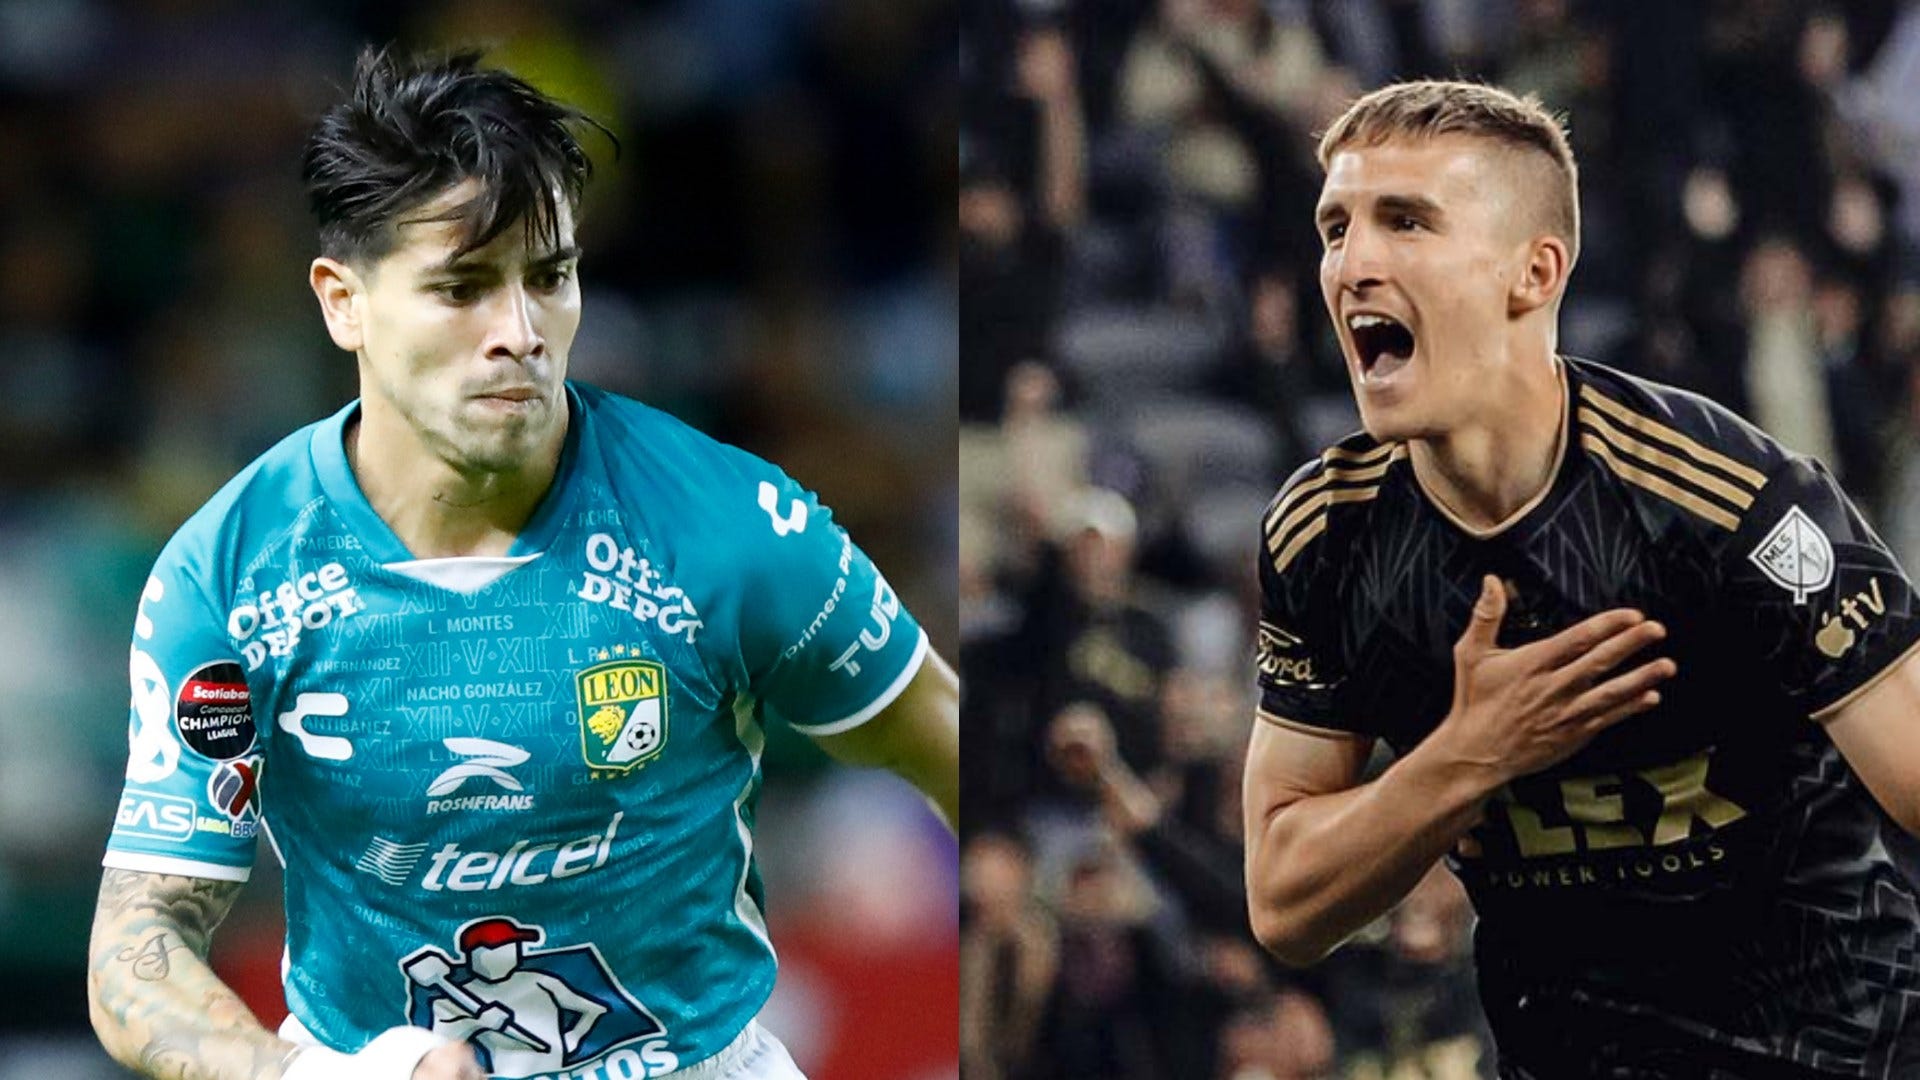 LAFC vs Leon Live stream, TV channel, kick-off time and where to watch CONCACAF Champions League finals Goal US